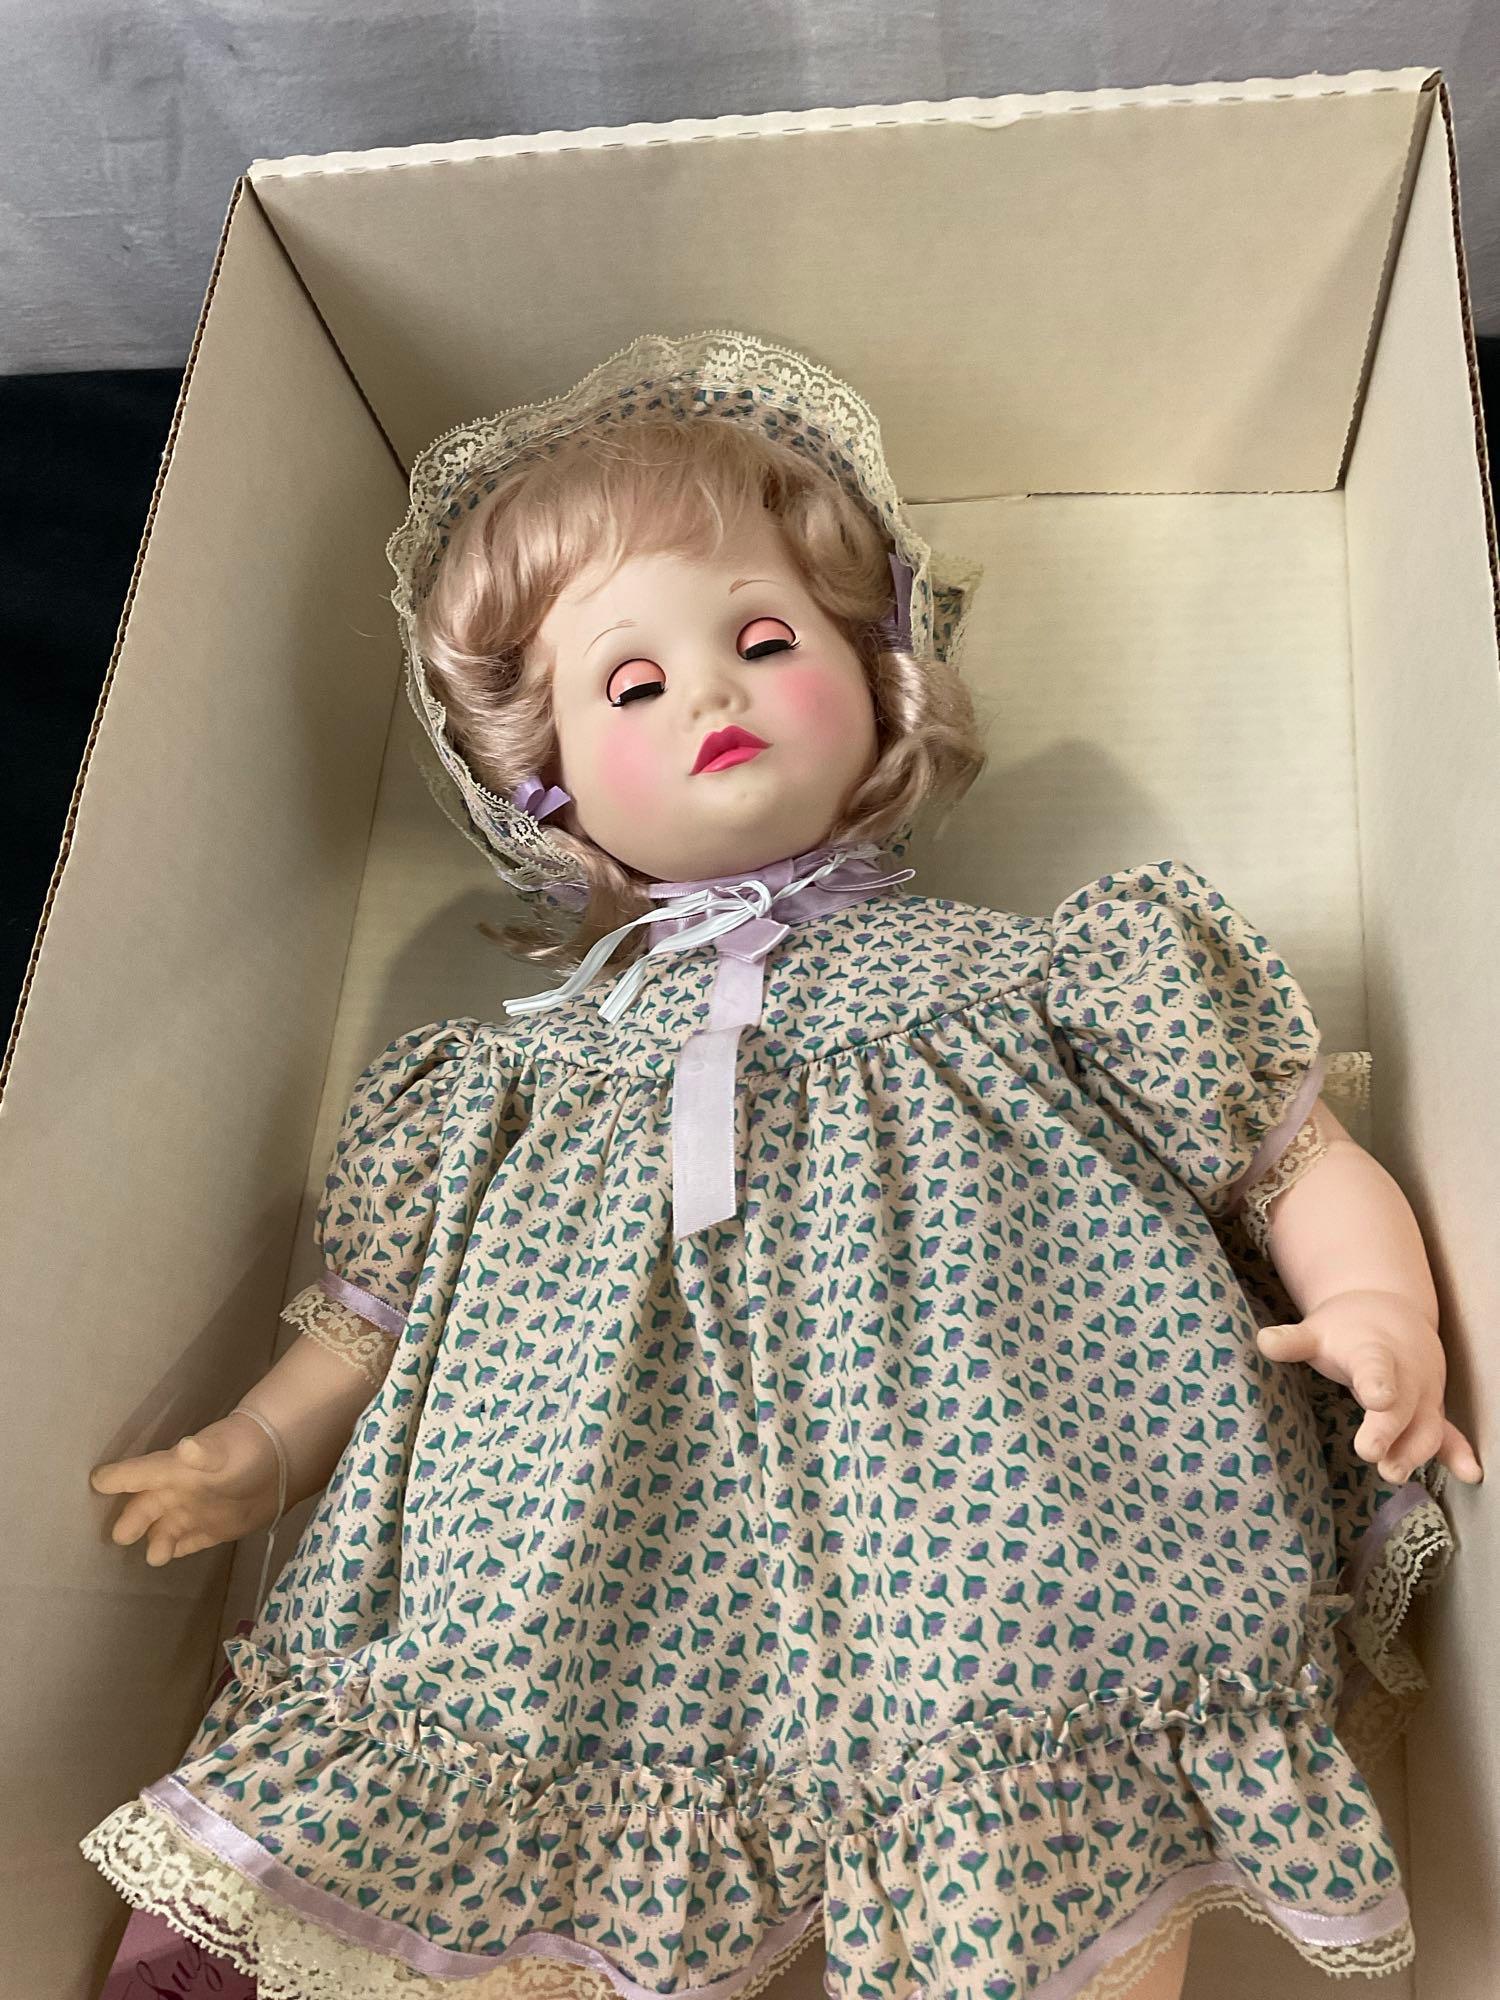 Suzanne Gibson Doll from Reeves Intl. #24844 Lynn